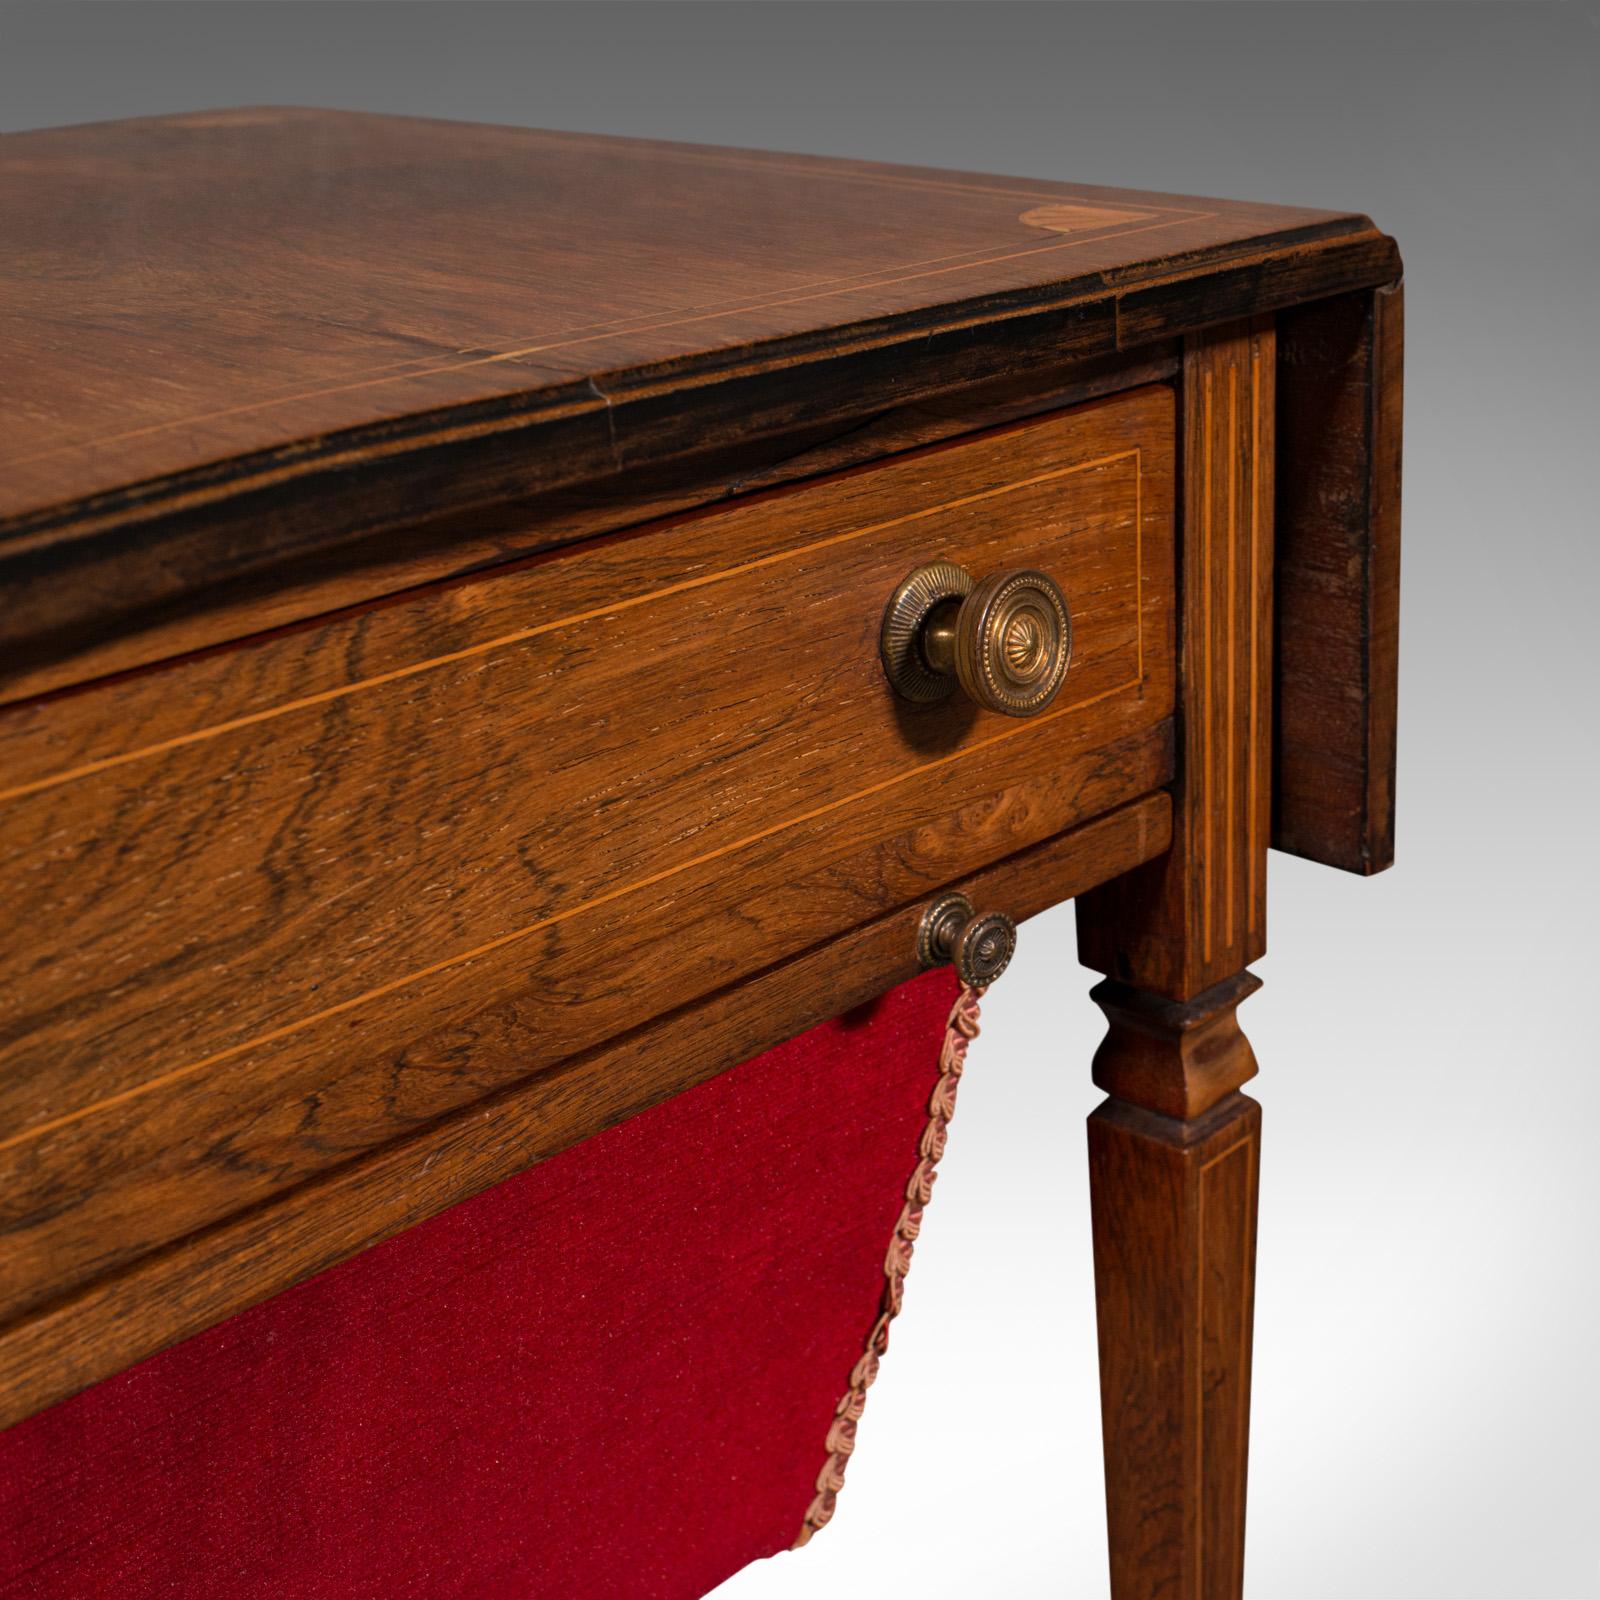 Antique Drop Leaf Sewing Table, English, Rosewood, Side, Lamp, Regency, C.1820 For Sale 2